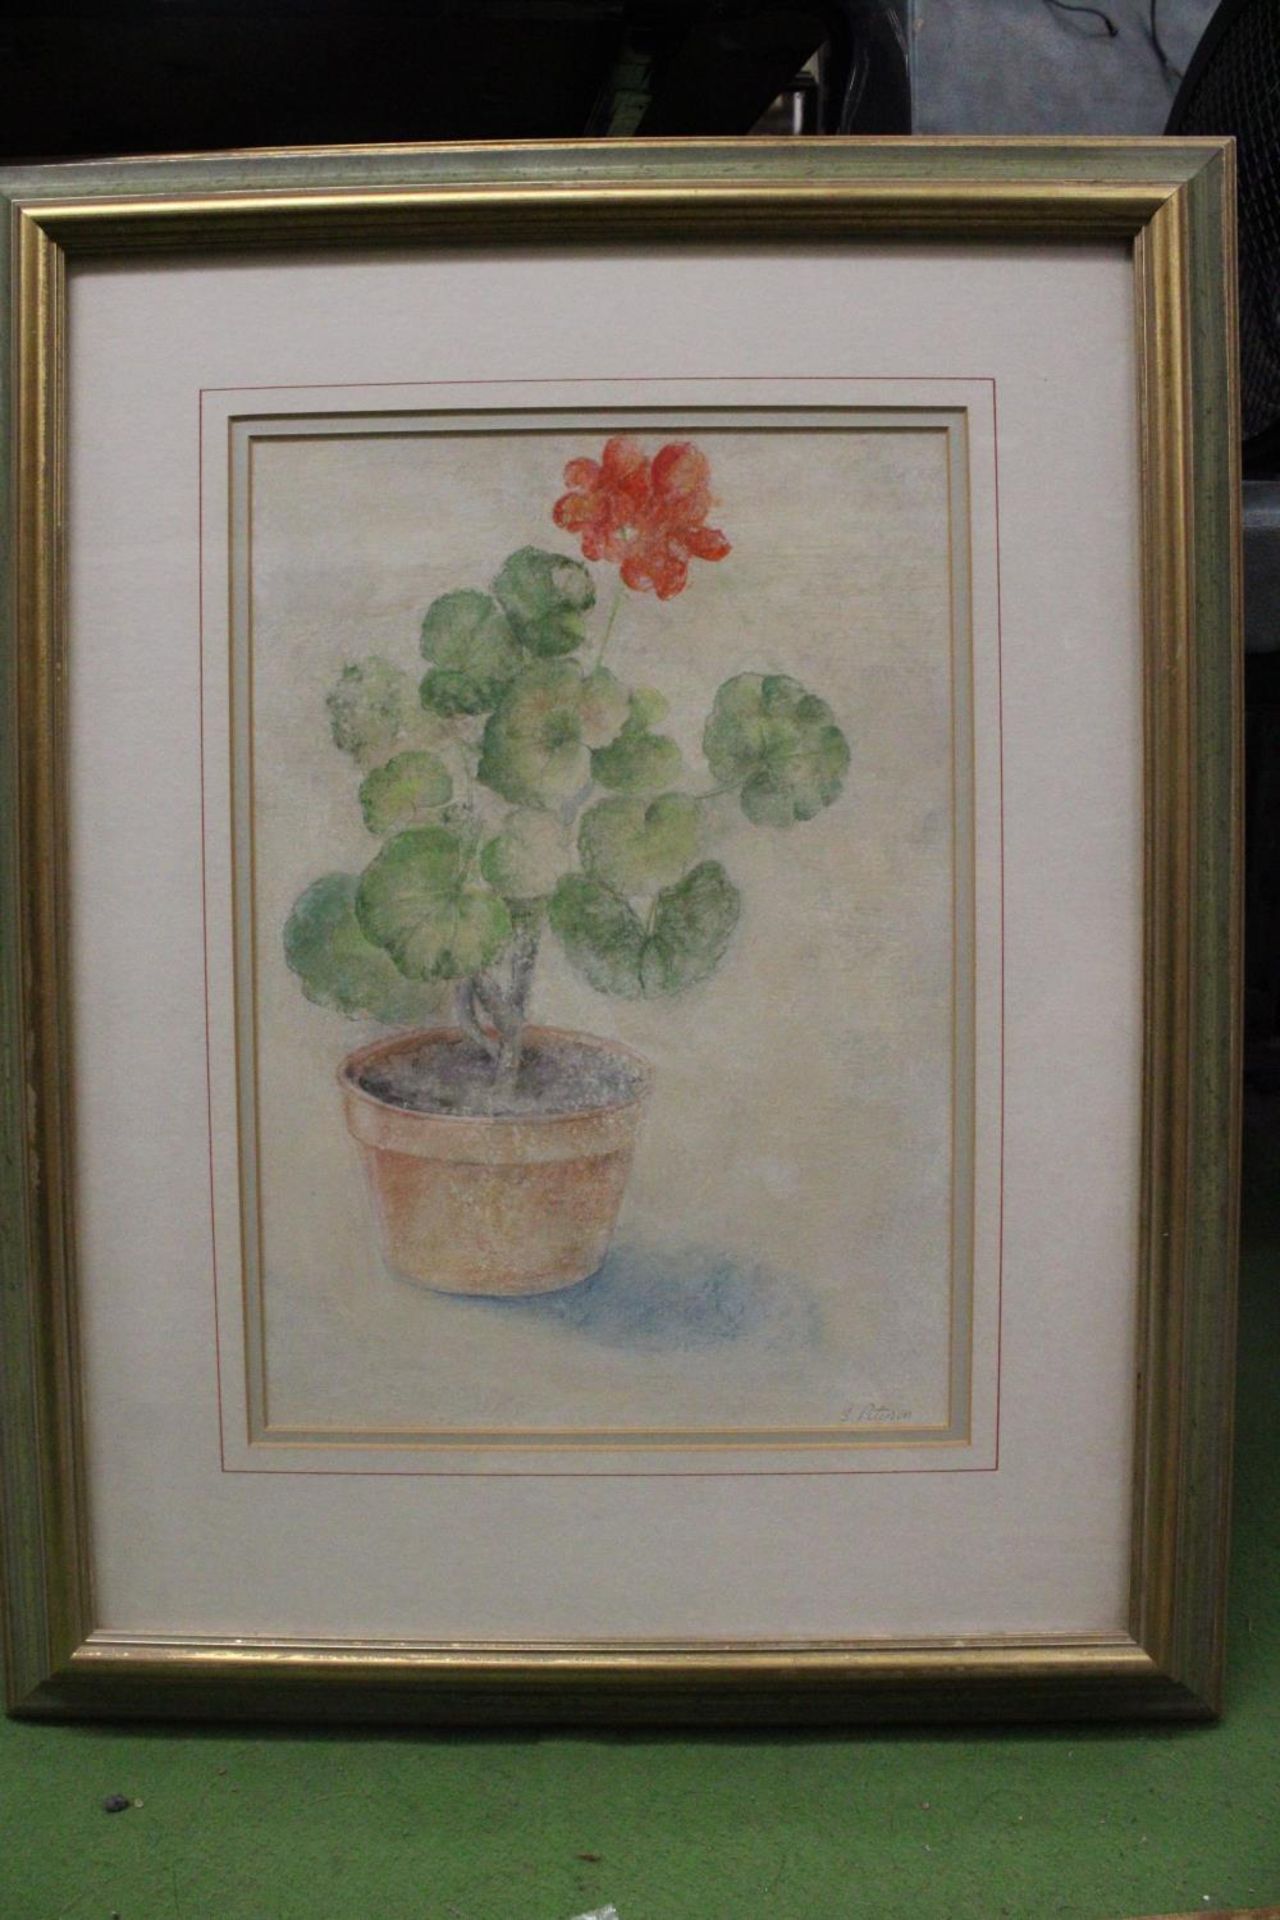 A MIXED MEDIA PICTURE OF A PLANT IN A POT, PLUS A PRINT OF A HORSE FAIR - Image 3 of 4